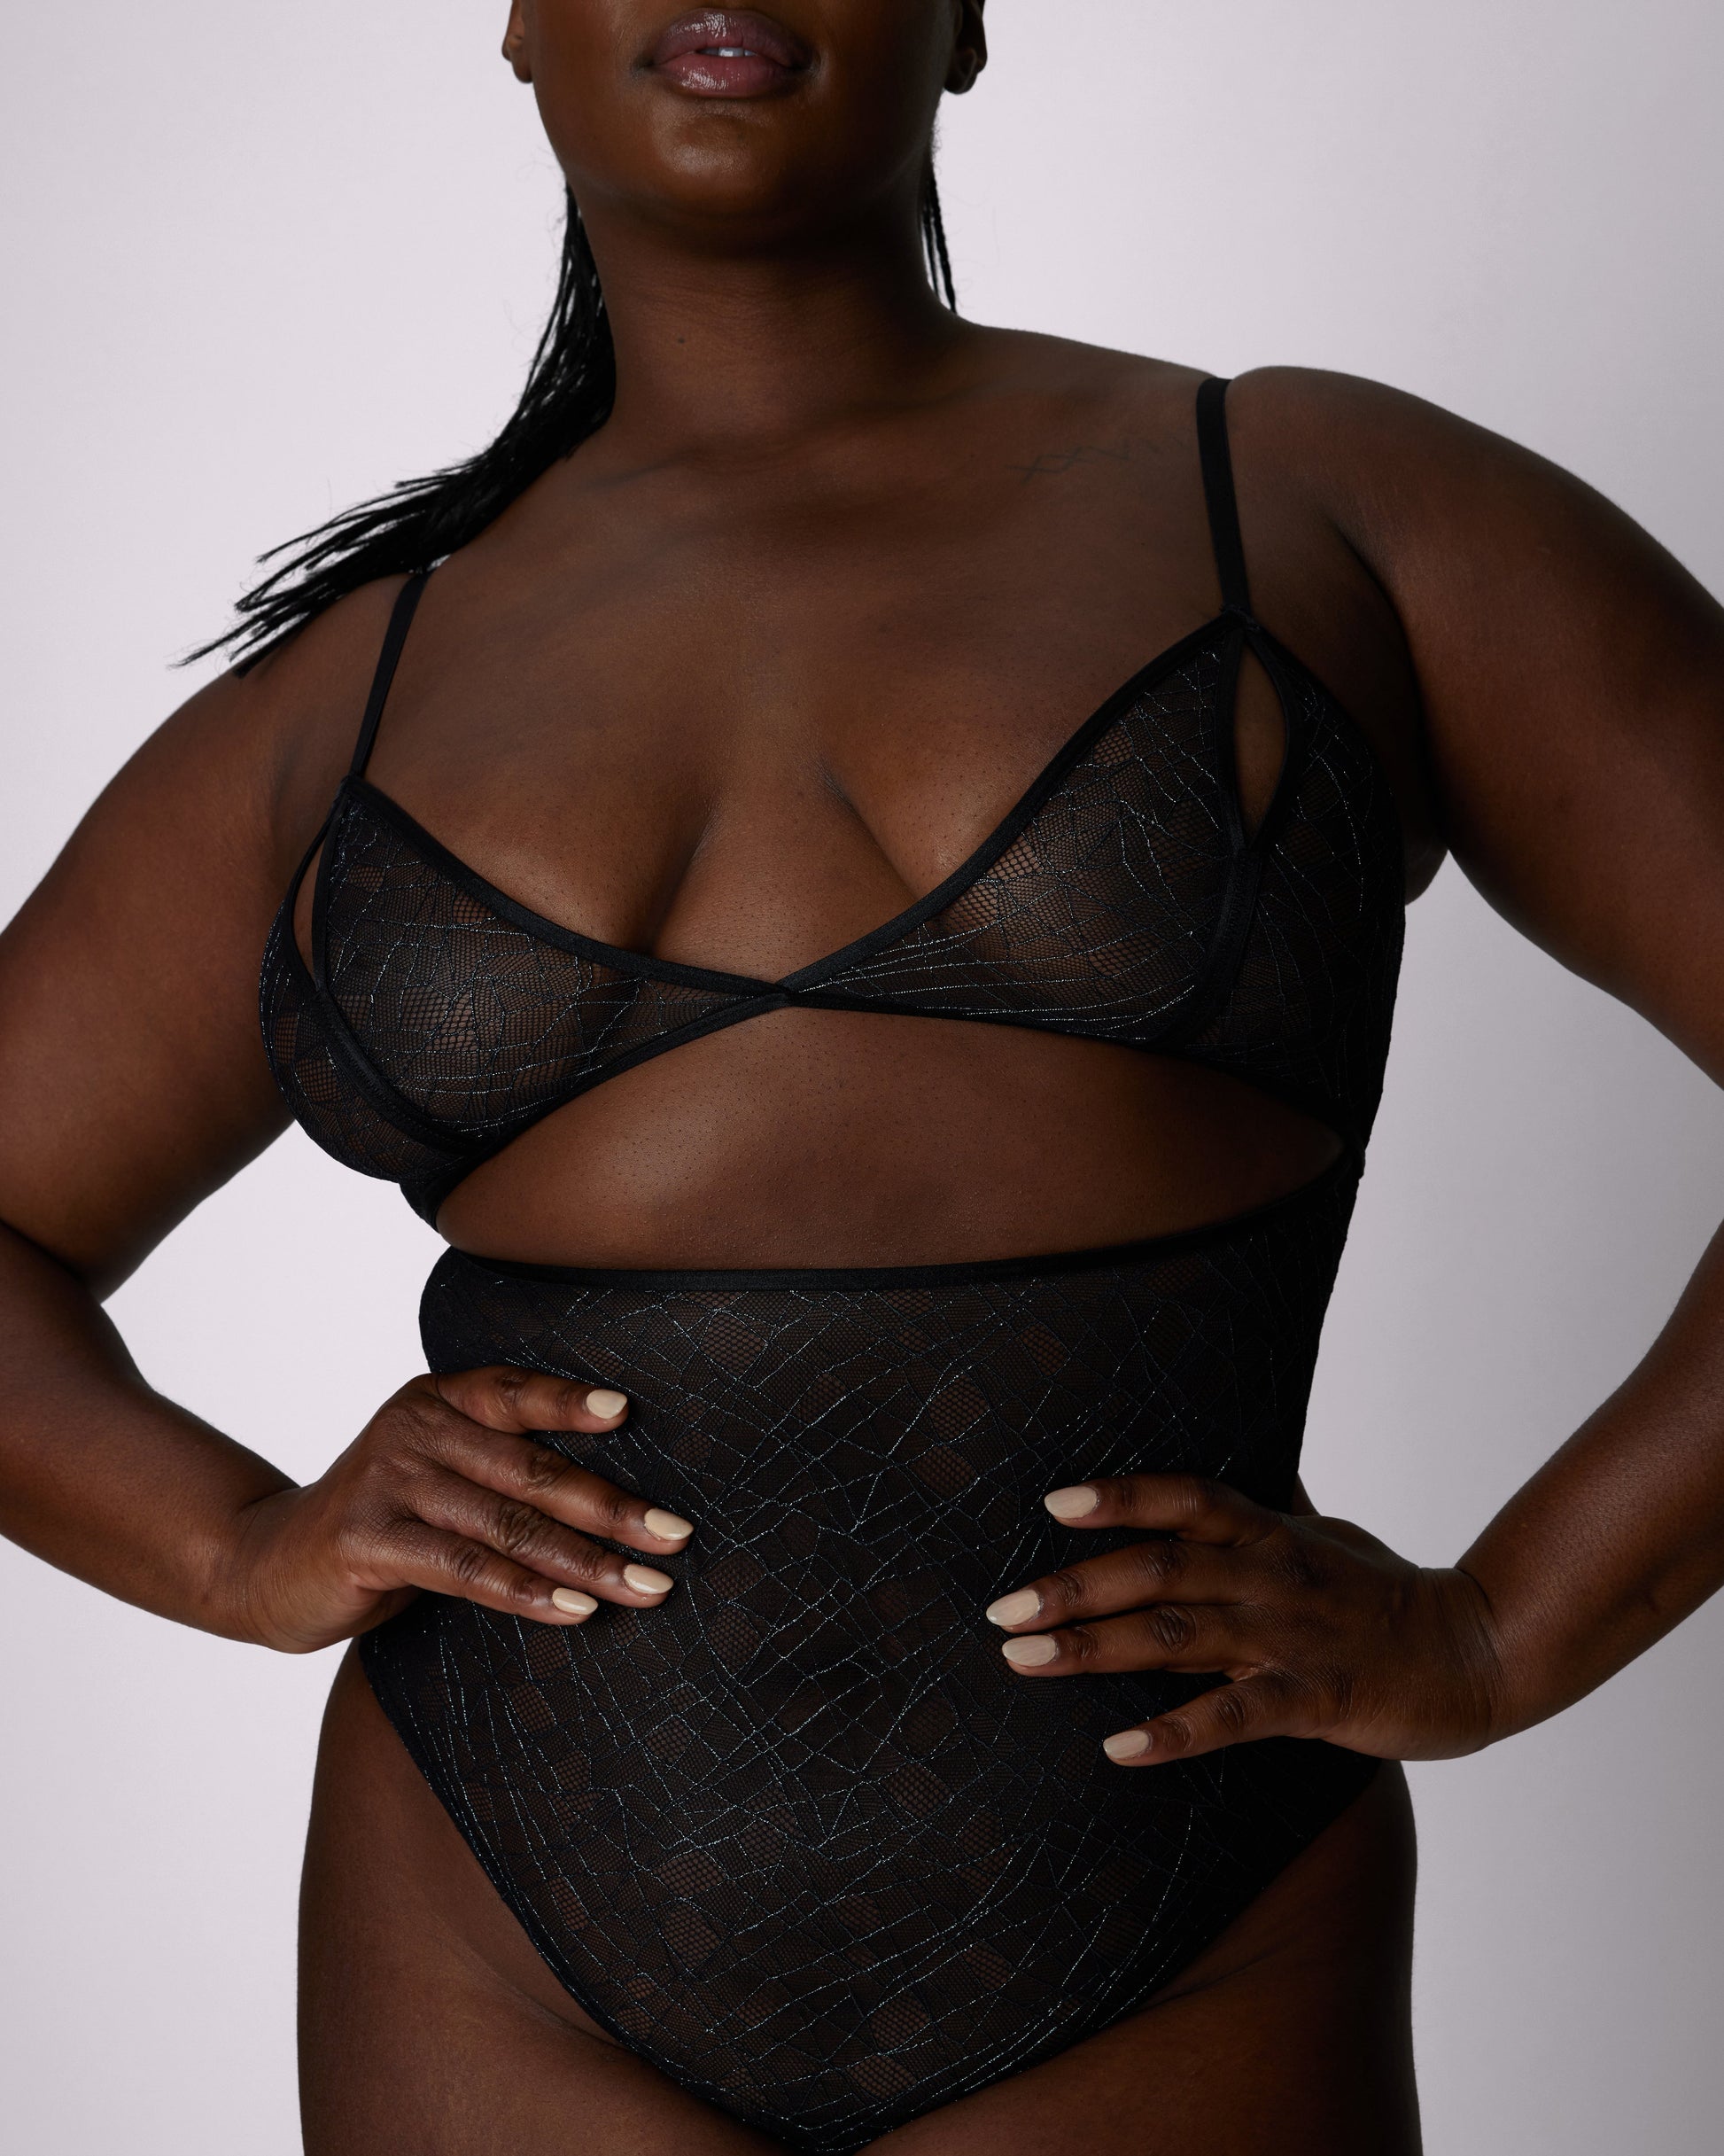 Lacy boxers, silk nighties, bodysuits: Here's what a new lingerie